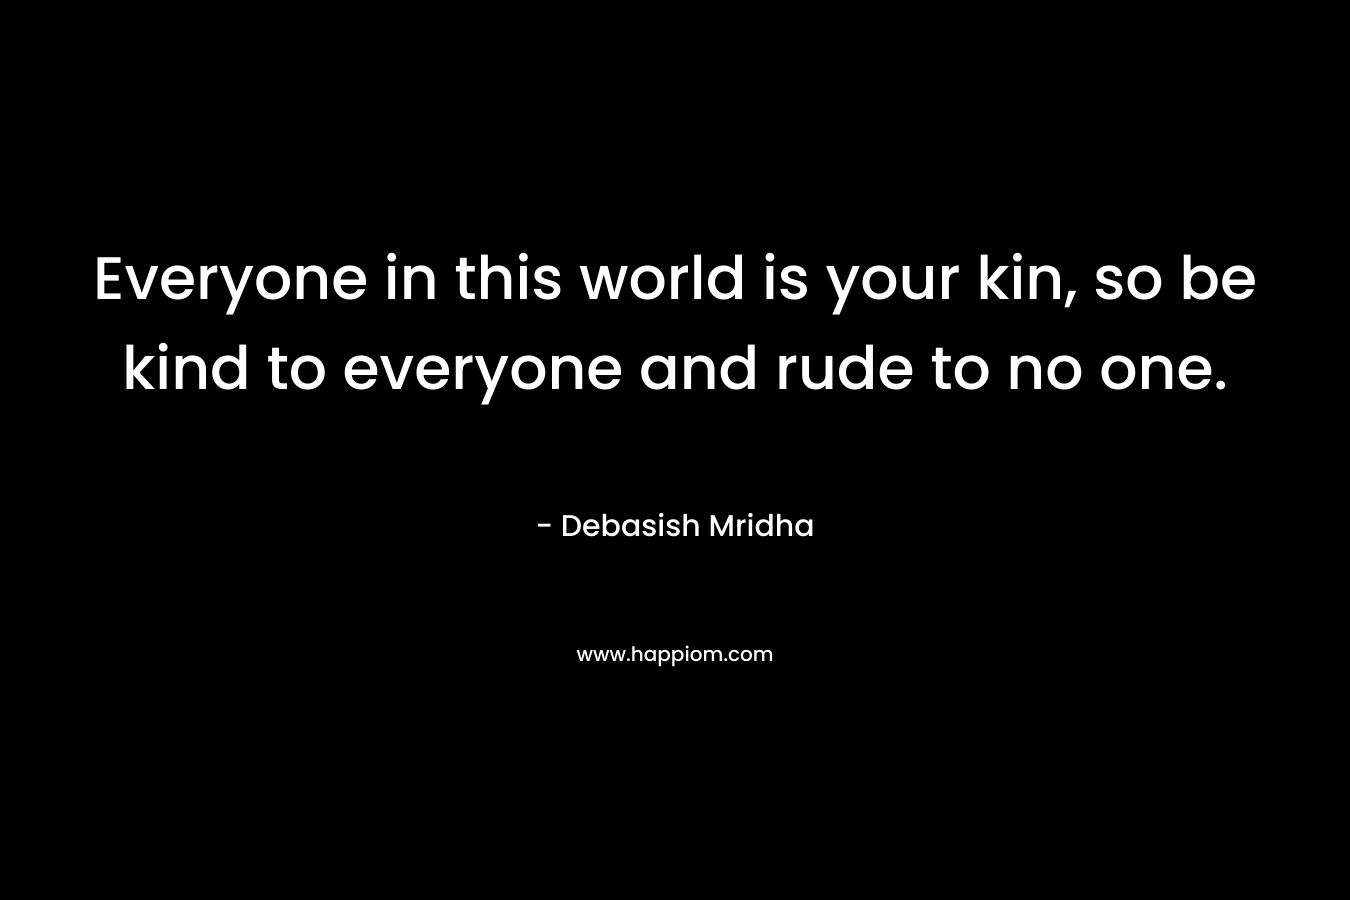 Everyone in this world is your kin, so be kind to everyone and rude to no one.